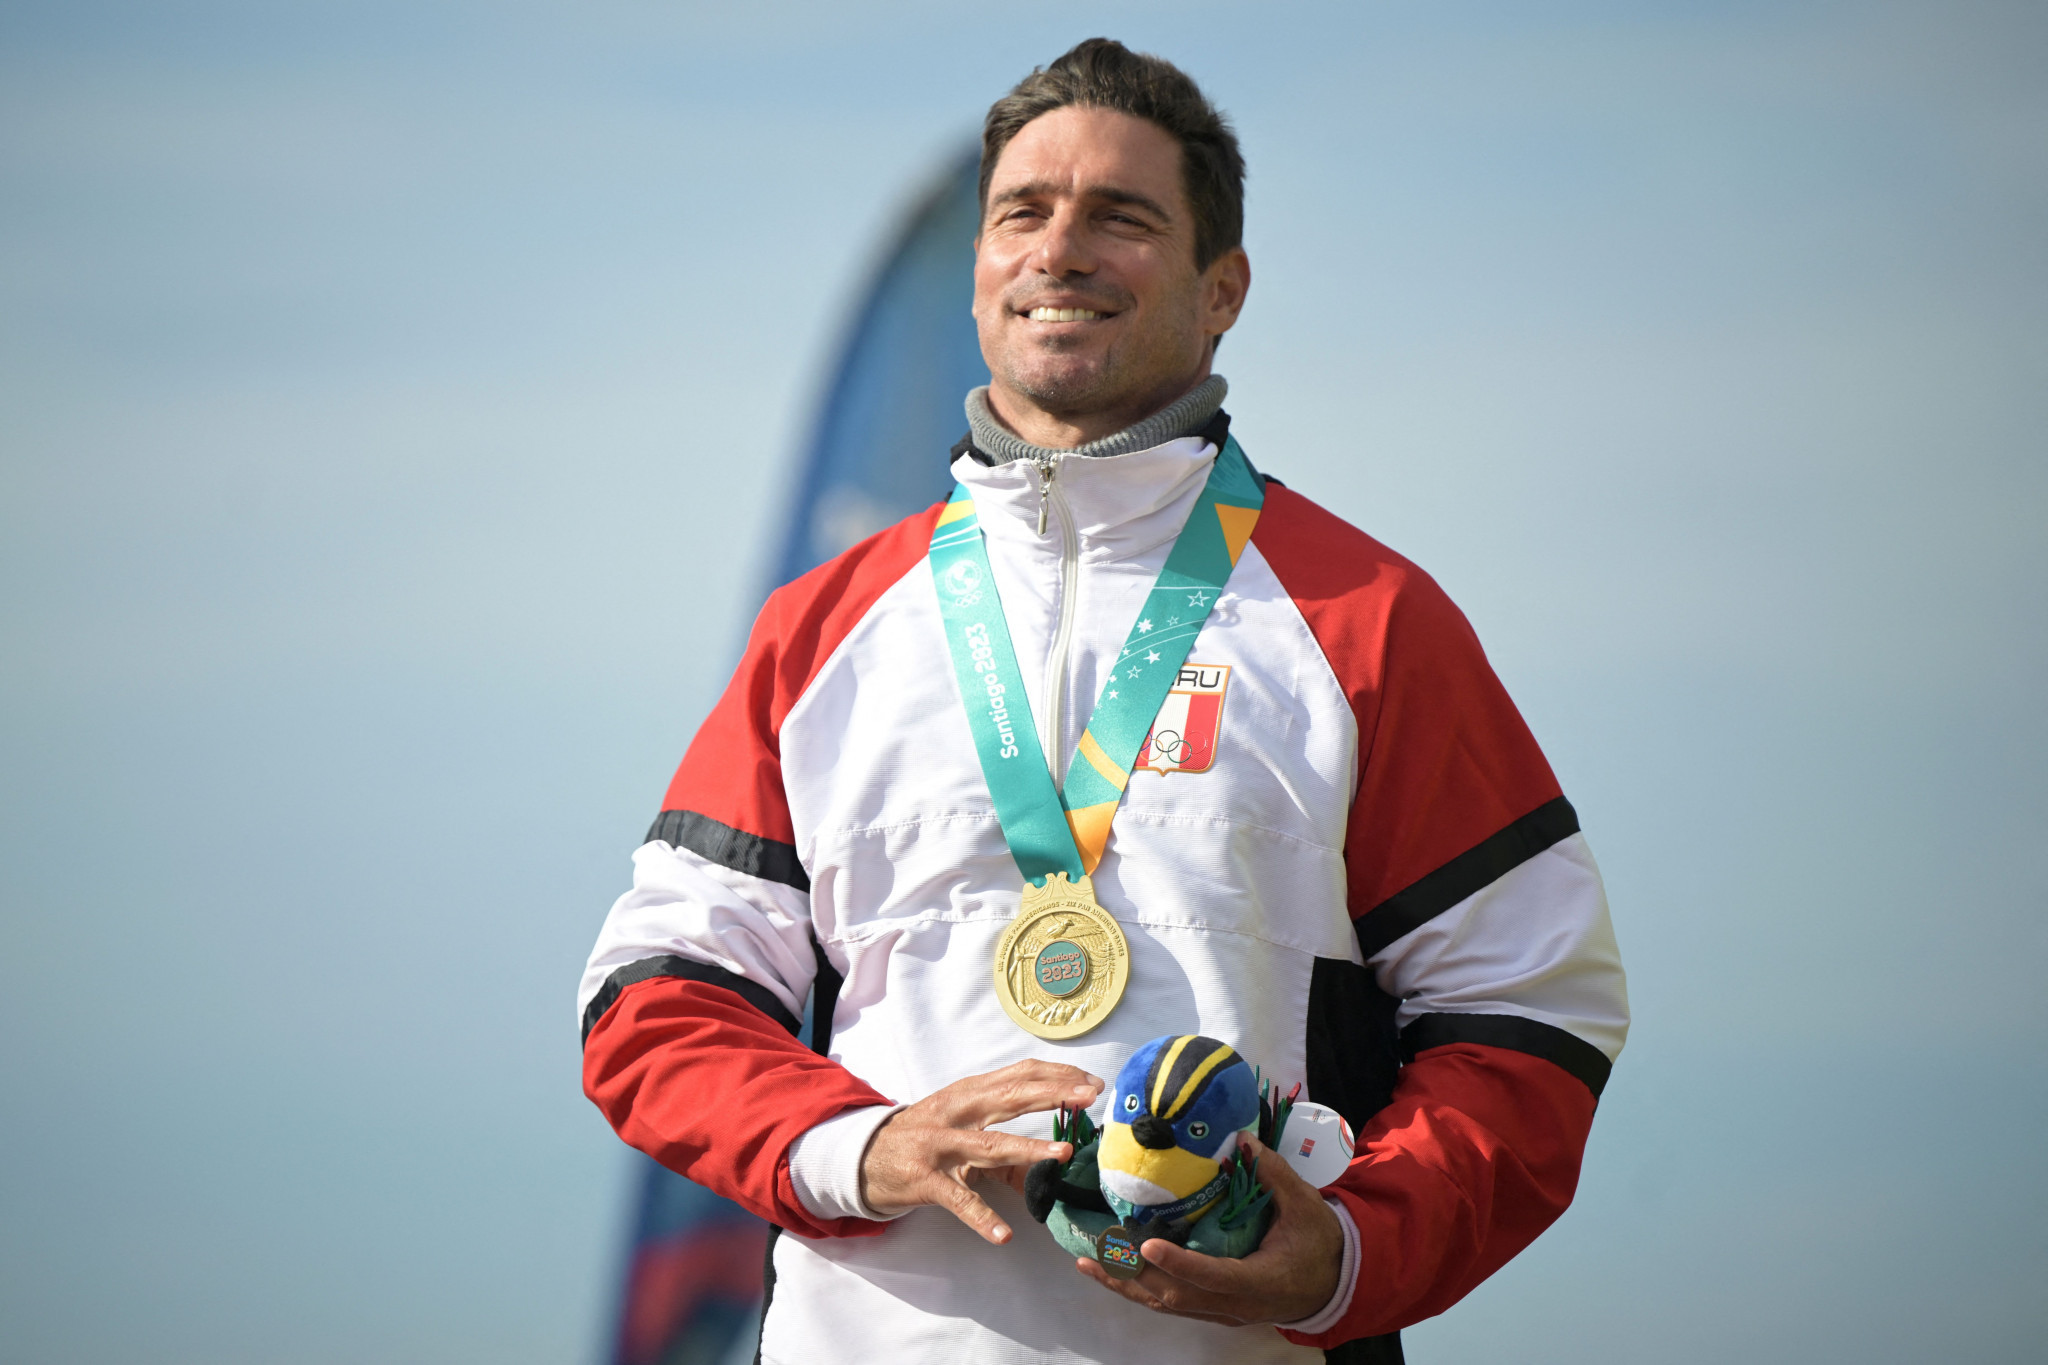 Benoit Clemente in the men's event was part of a Peruvian longboard double at Santiago 2023 ©Getty Images